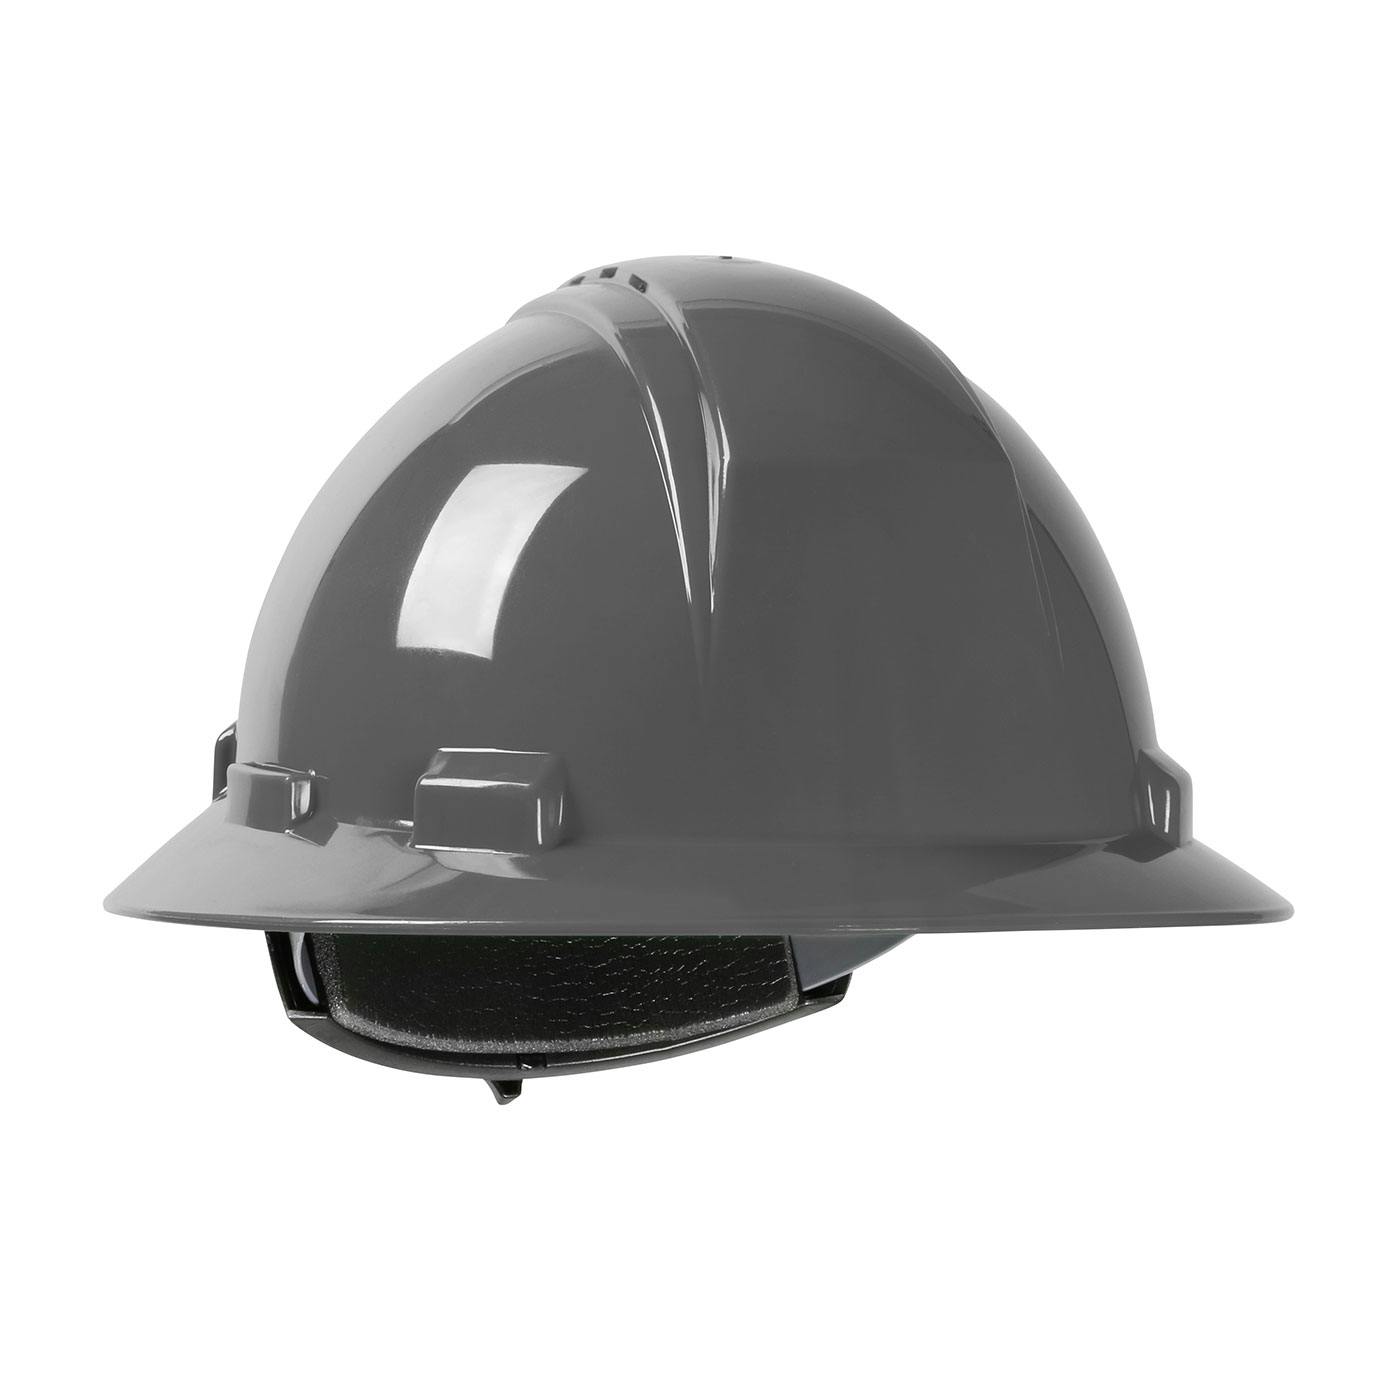 Kilimanjaro™ Vented, Full Brim Hard Hat with HDPE Shell, 4-Point Textile Suspension and Wheel Ratchet Adjustment (280-HP641RV)